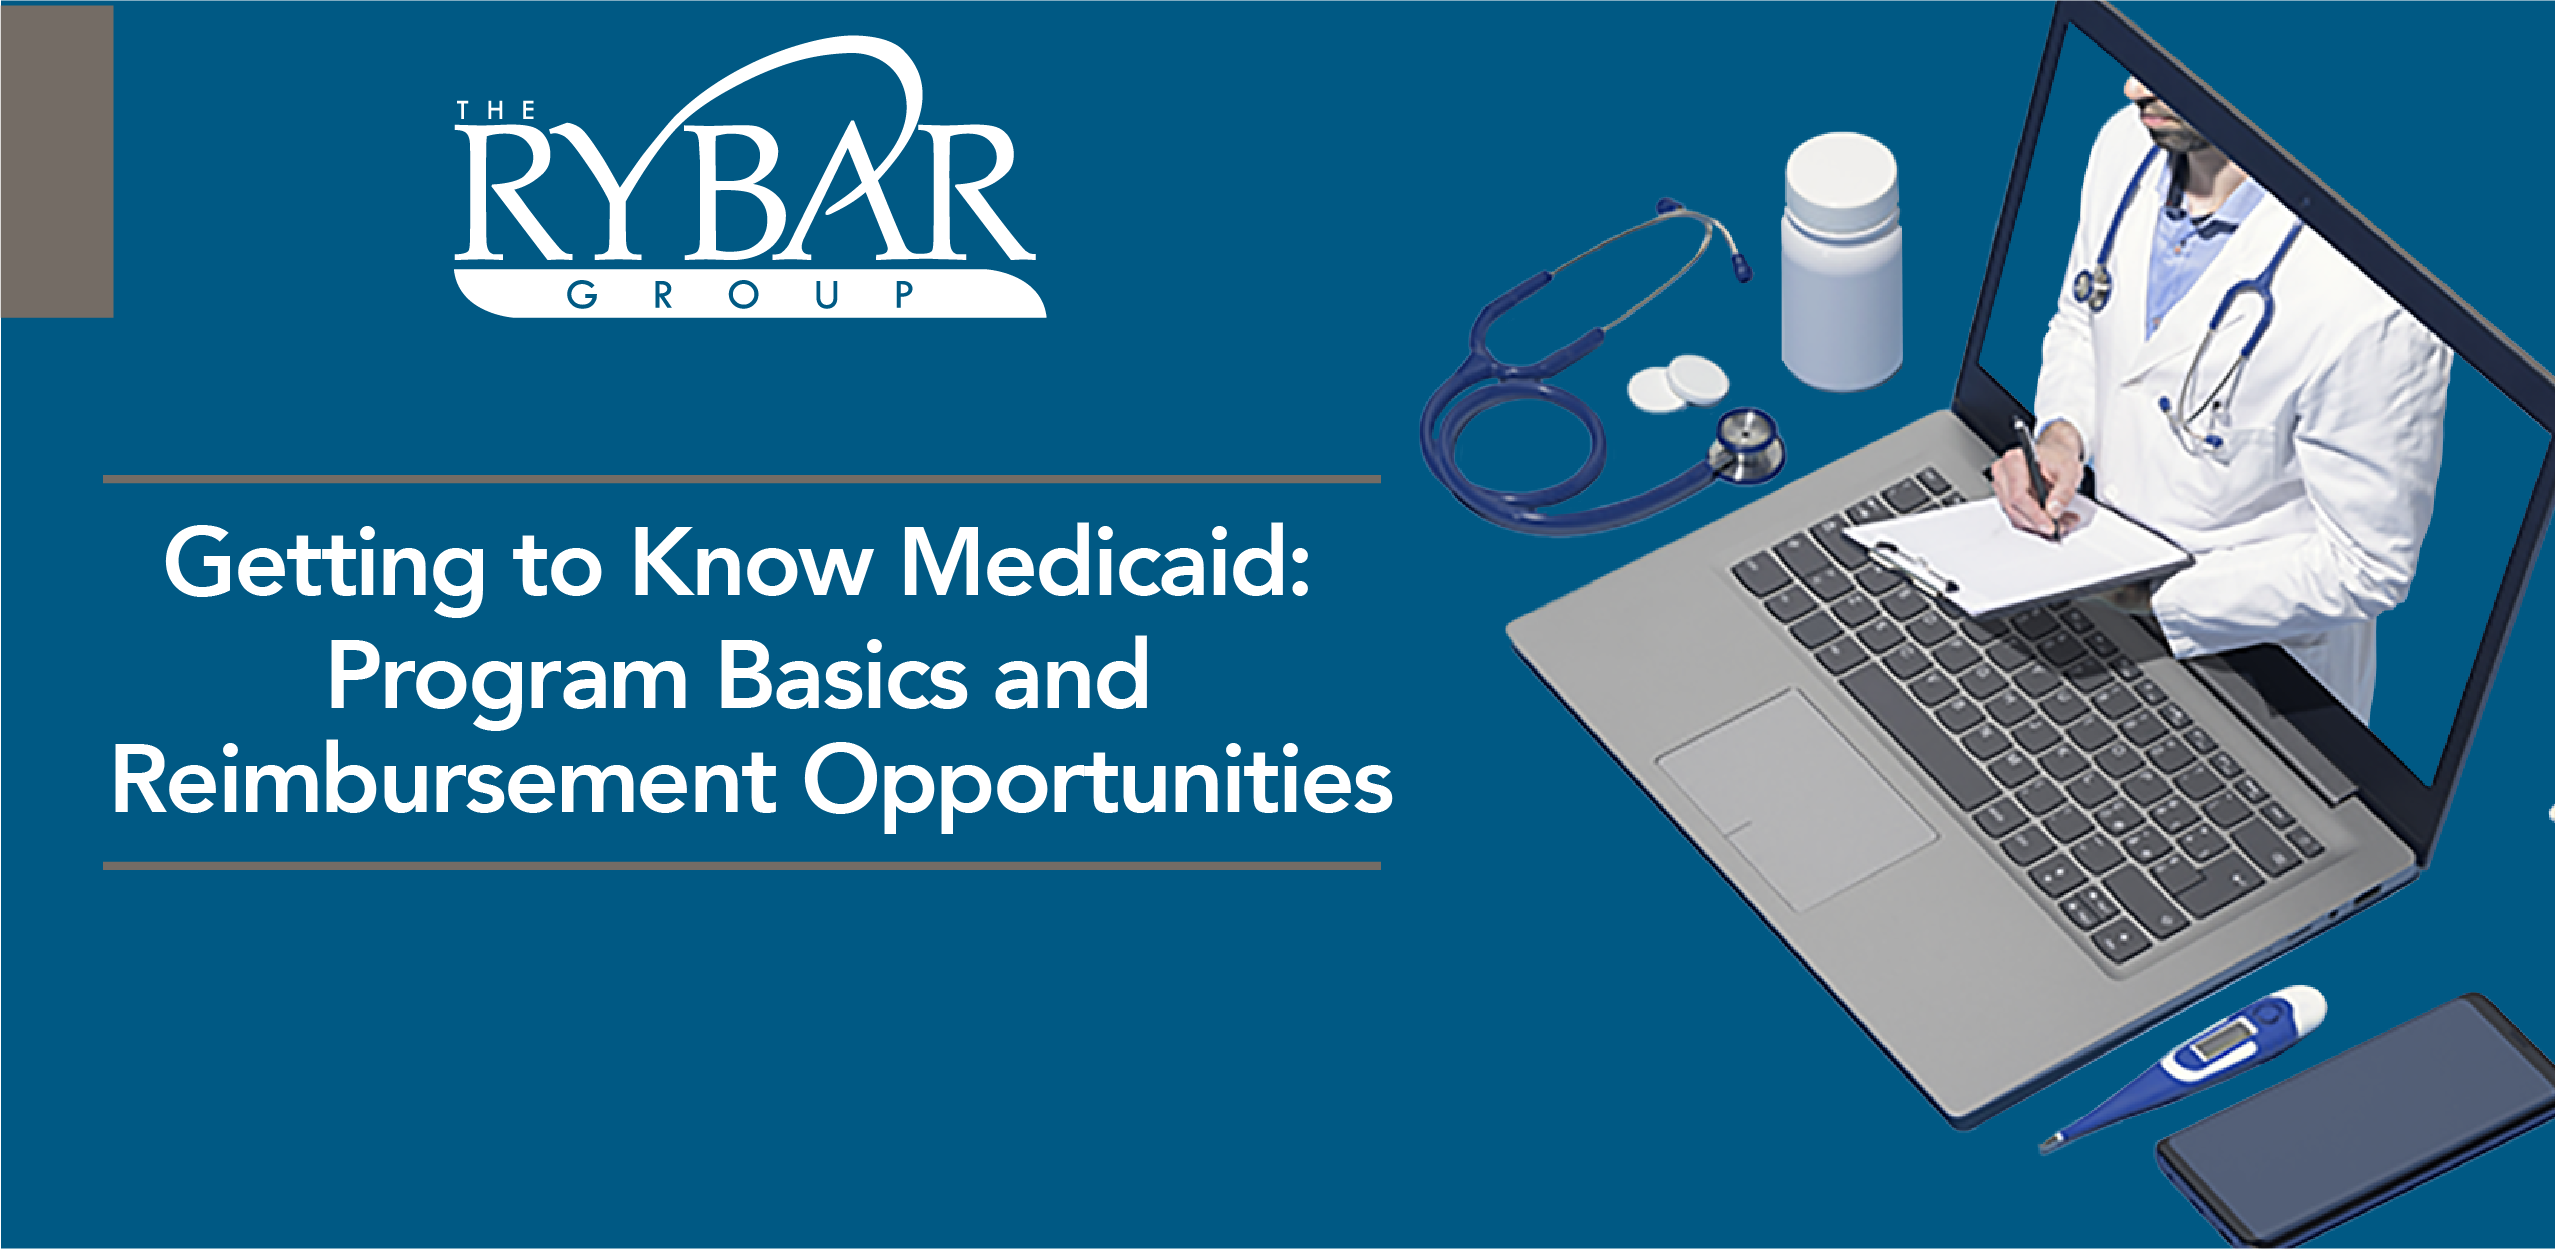 TRG-046 Getting to Know Medicaid